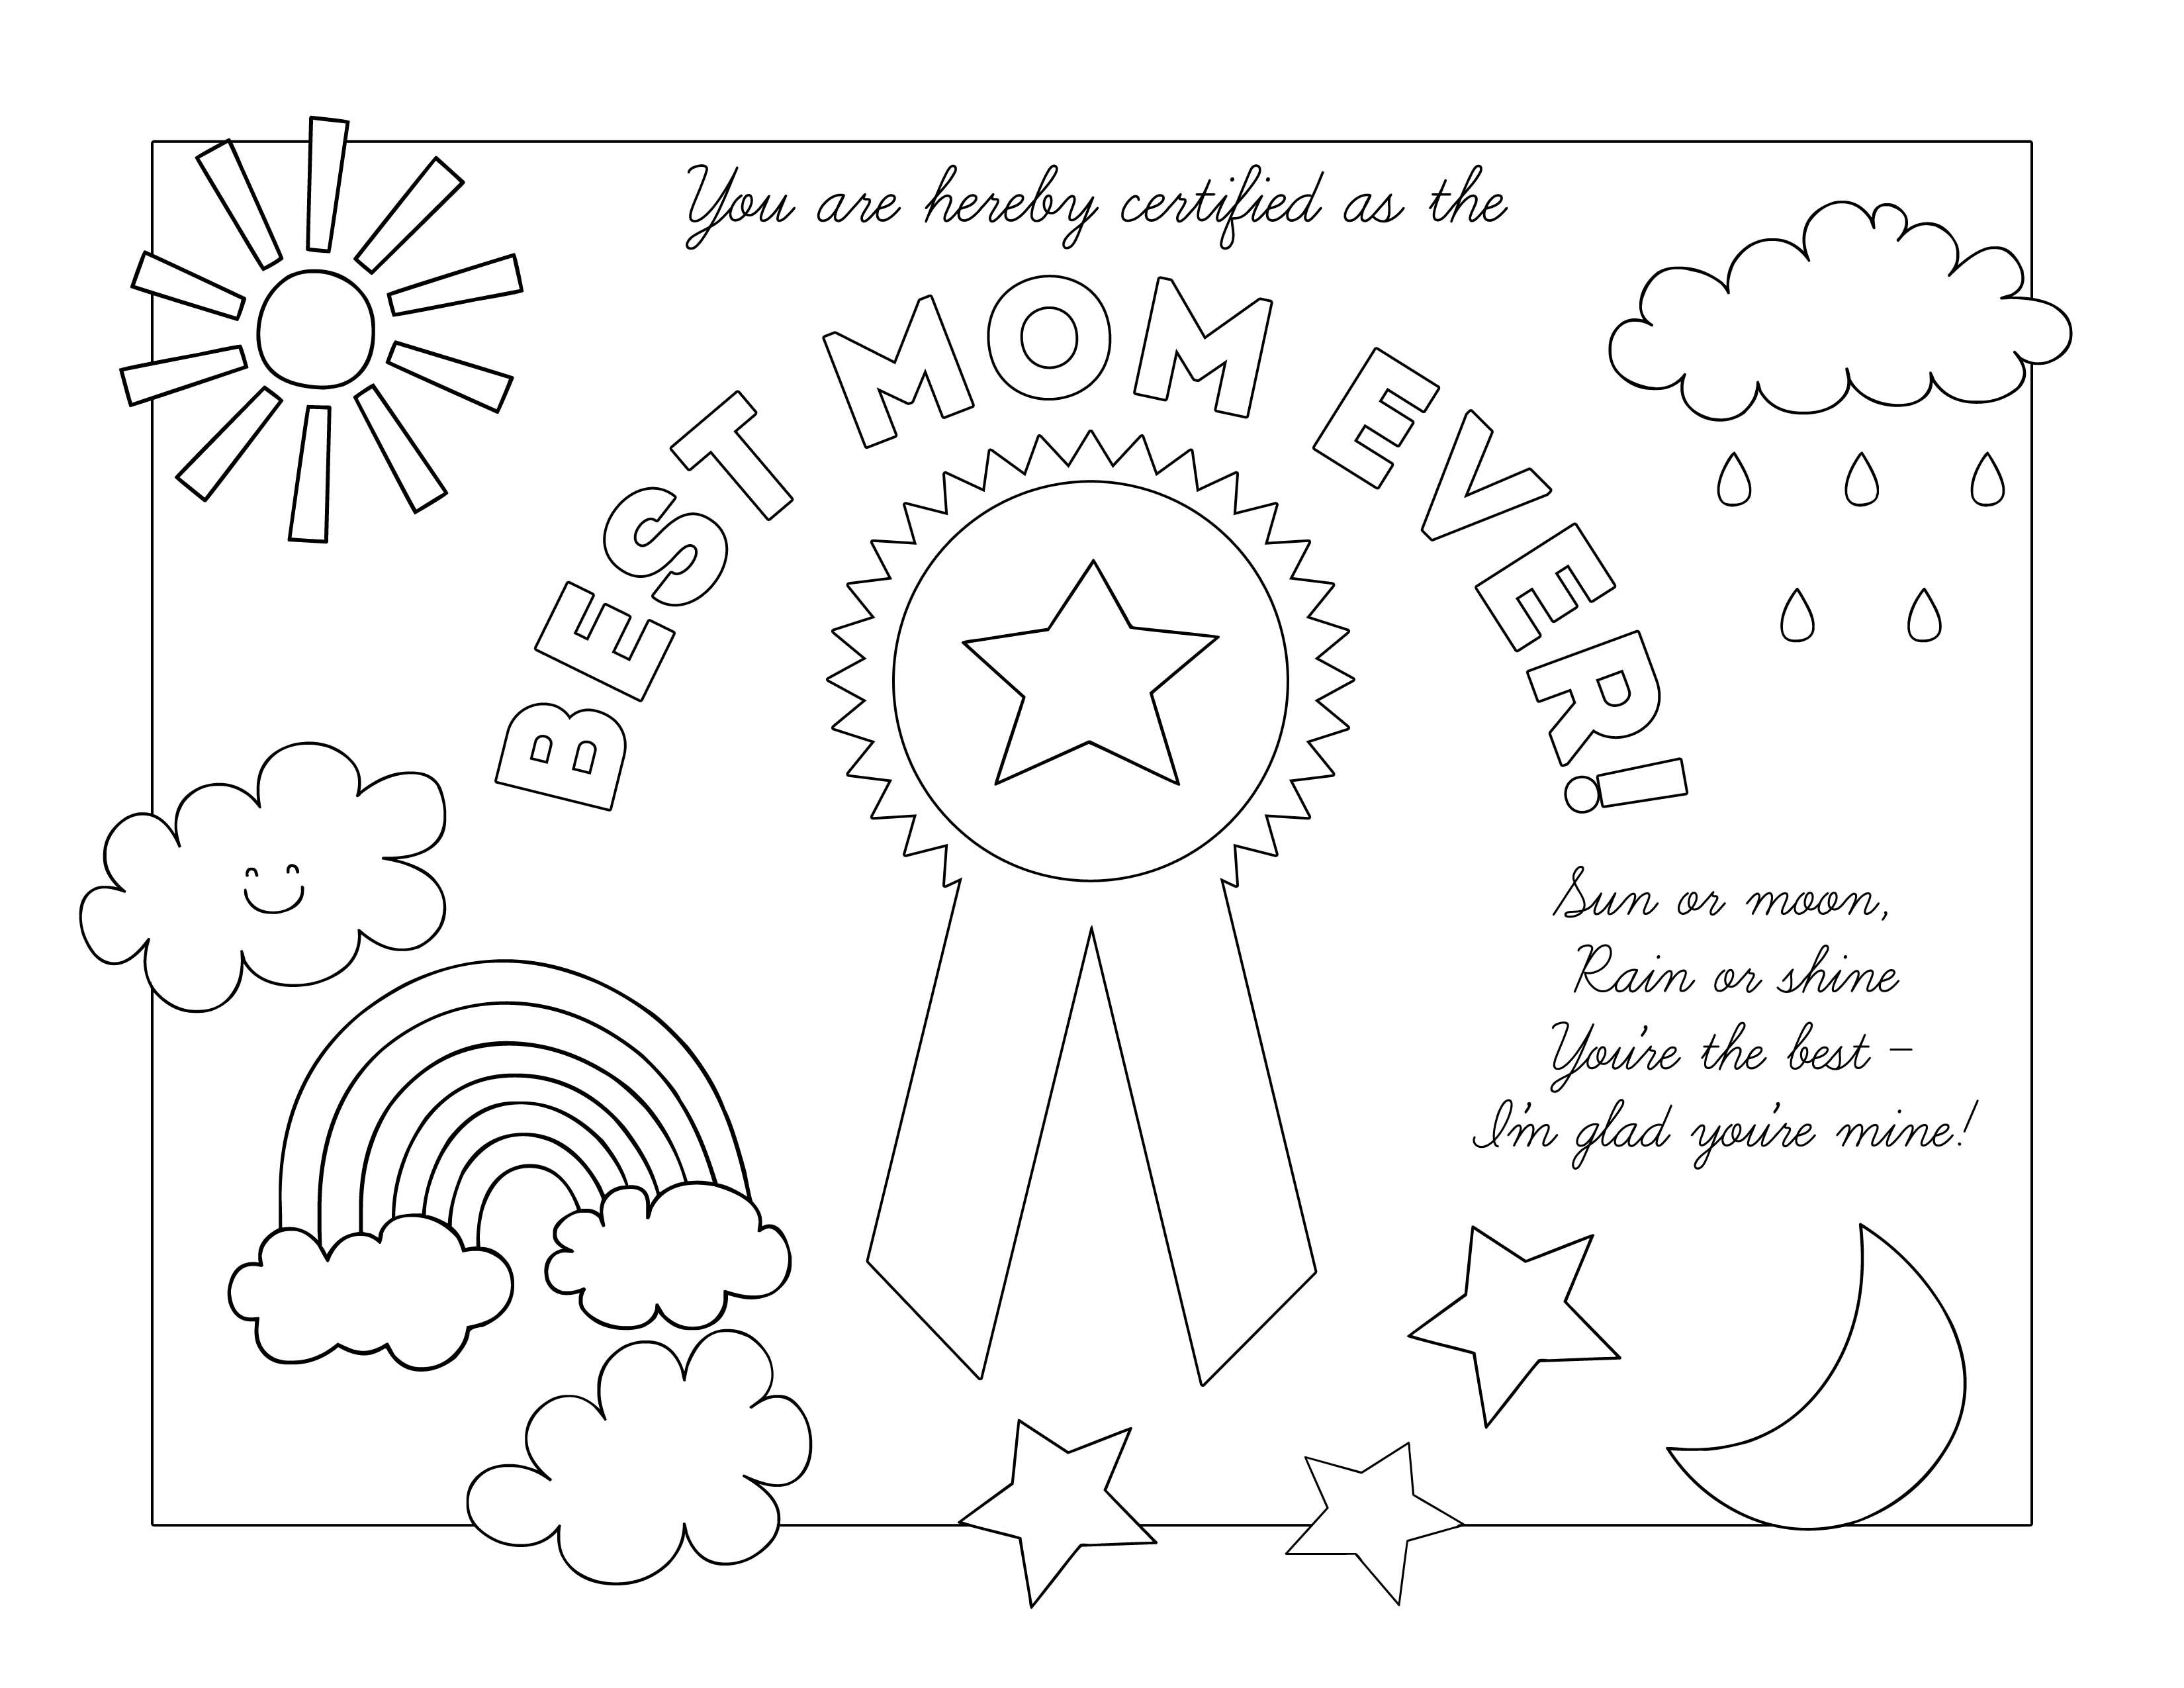 Mothers day certificates the mormon home mothers day coloring pages mothers day printables mothers day colors